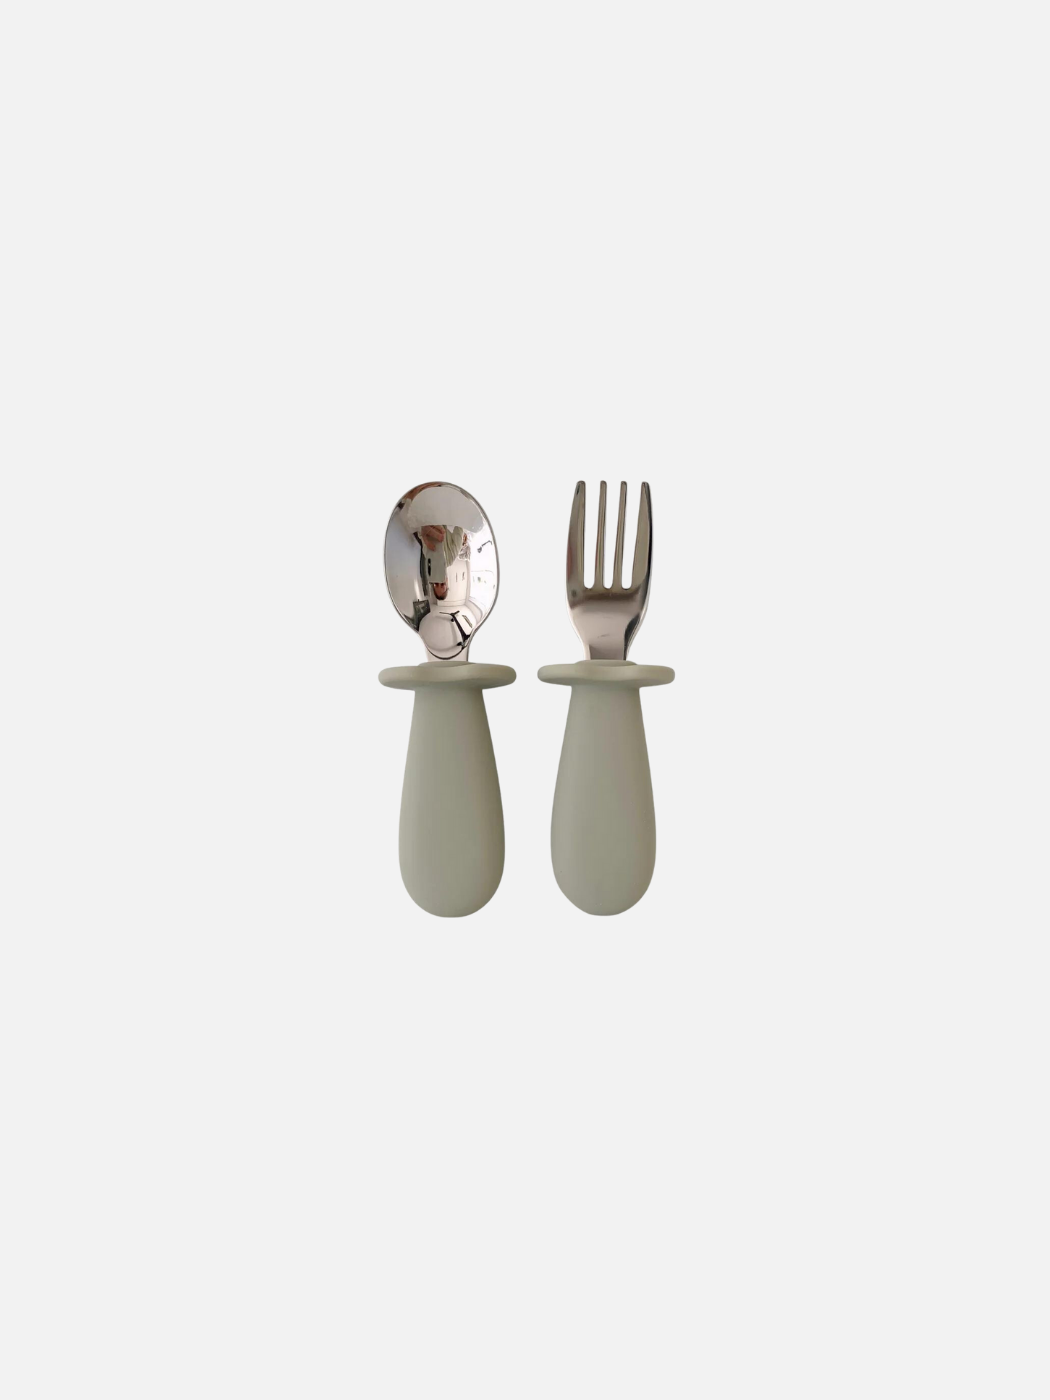 Toddler Cutlery - Oyster